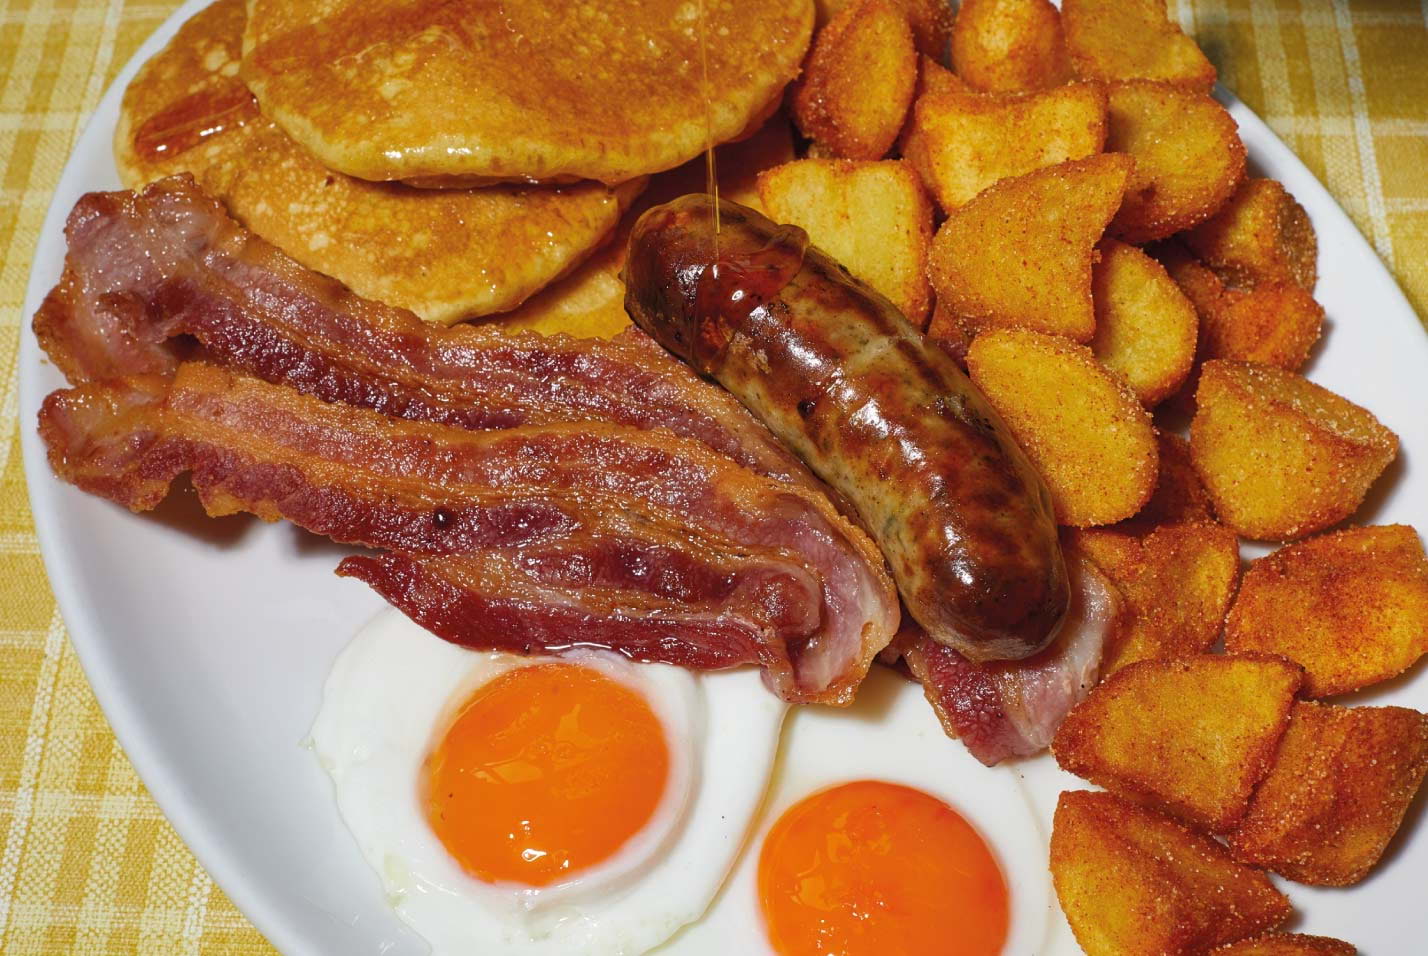 Get 50% off at the new Breakfast Club this Friday only